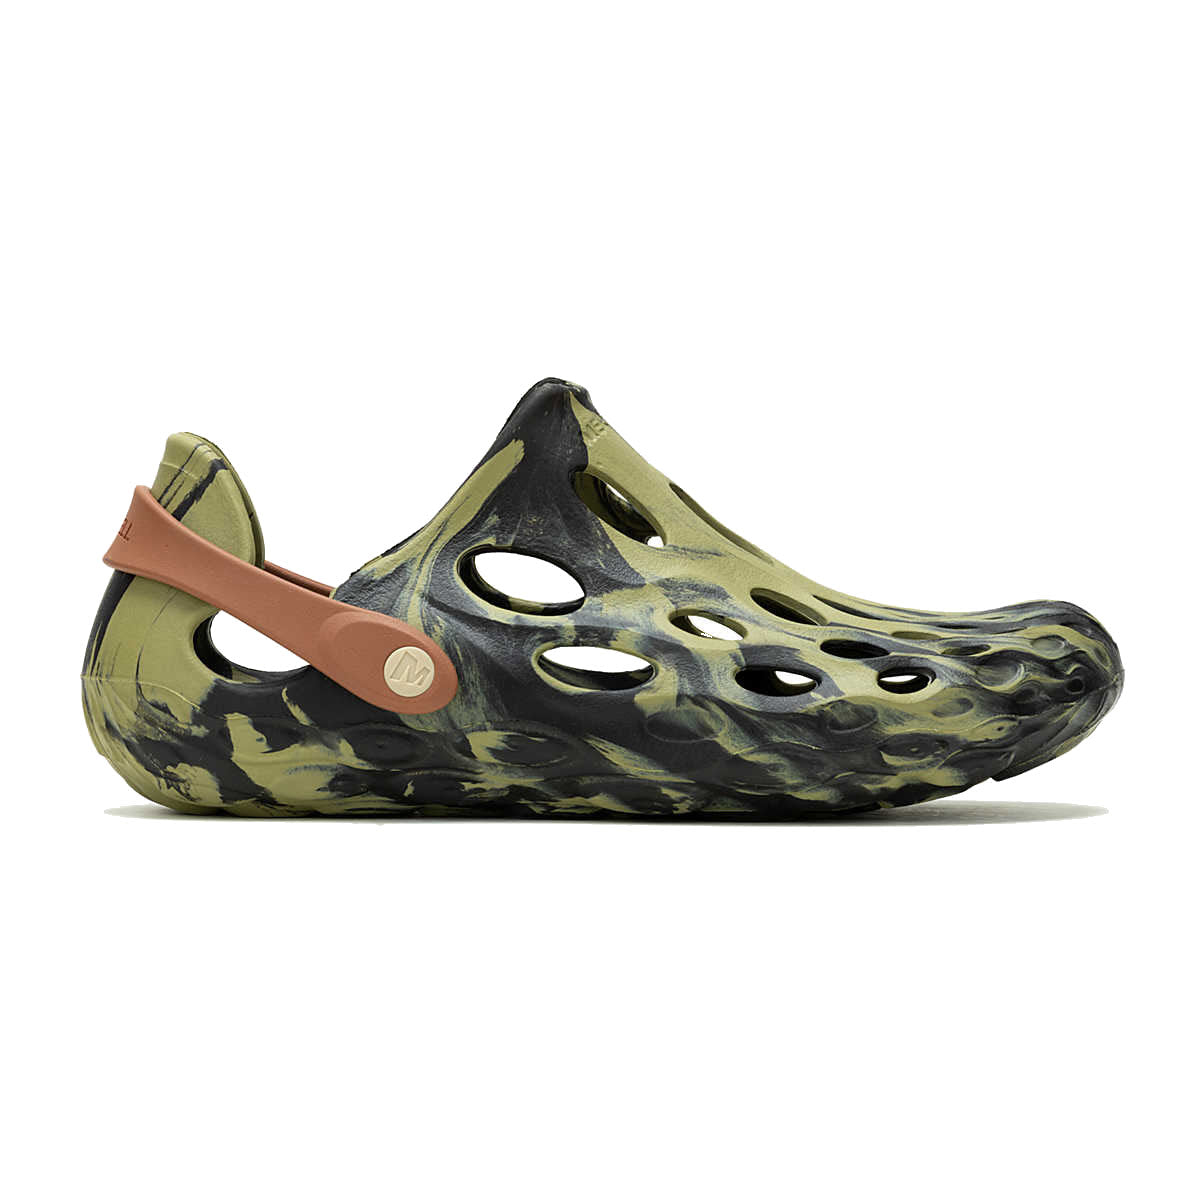 A single MERRELL HYDRO MOC SLIP ON BLACK MOSSTONE CAMO with circular ventilation holes and a pivoting heel strap.